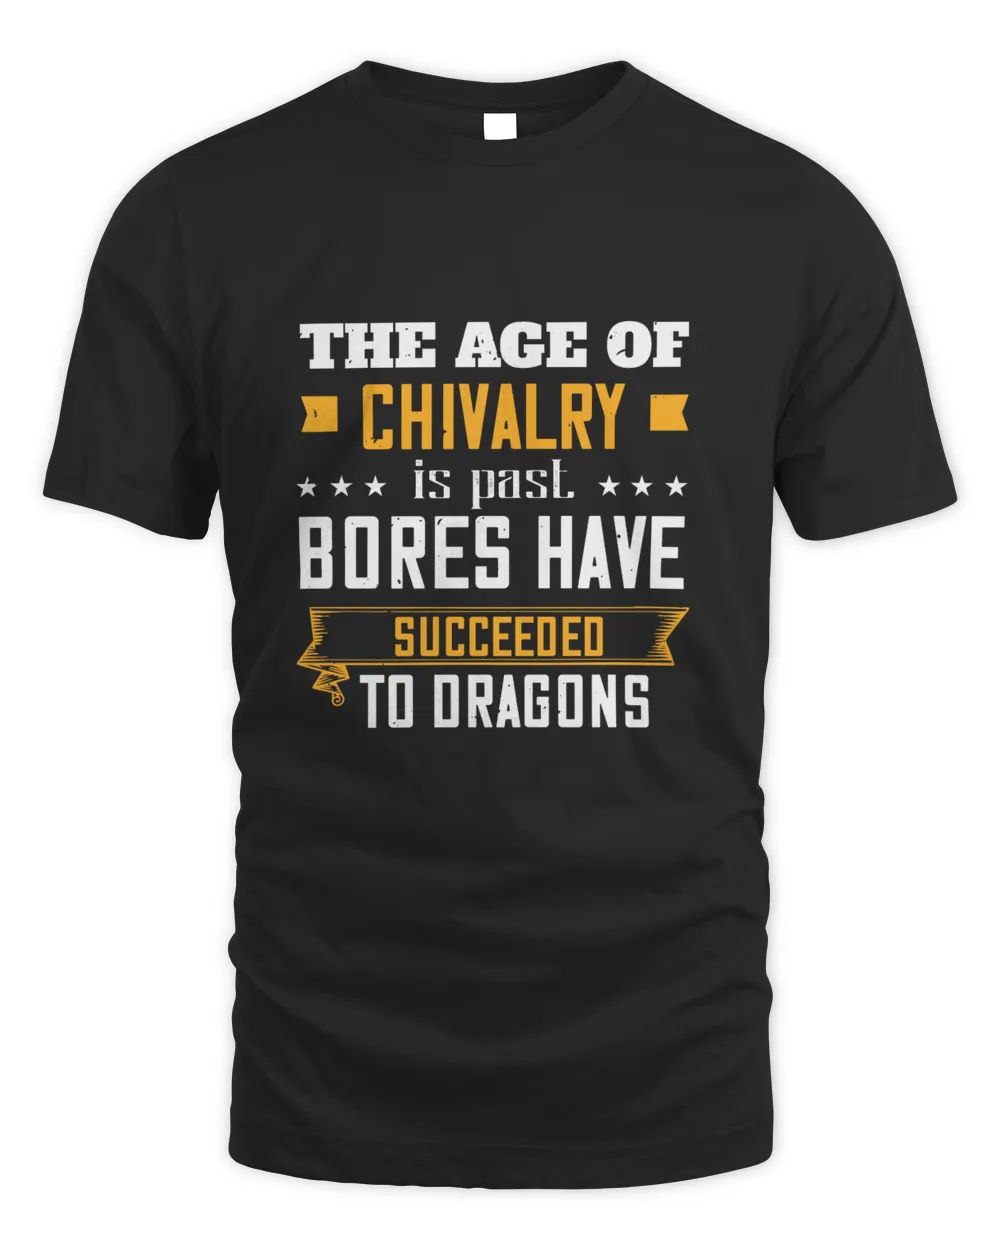 The age of chivalry is past. Bores have succeeded to dragons-01